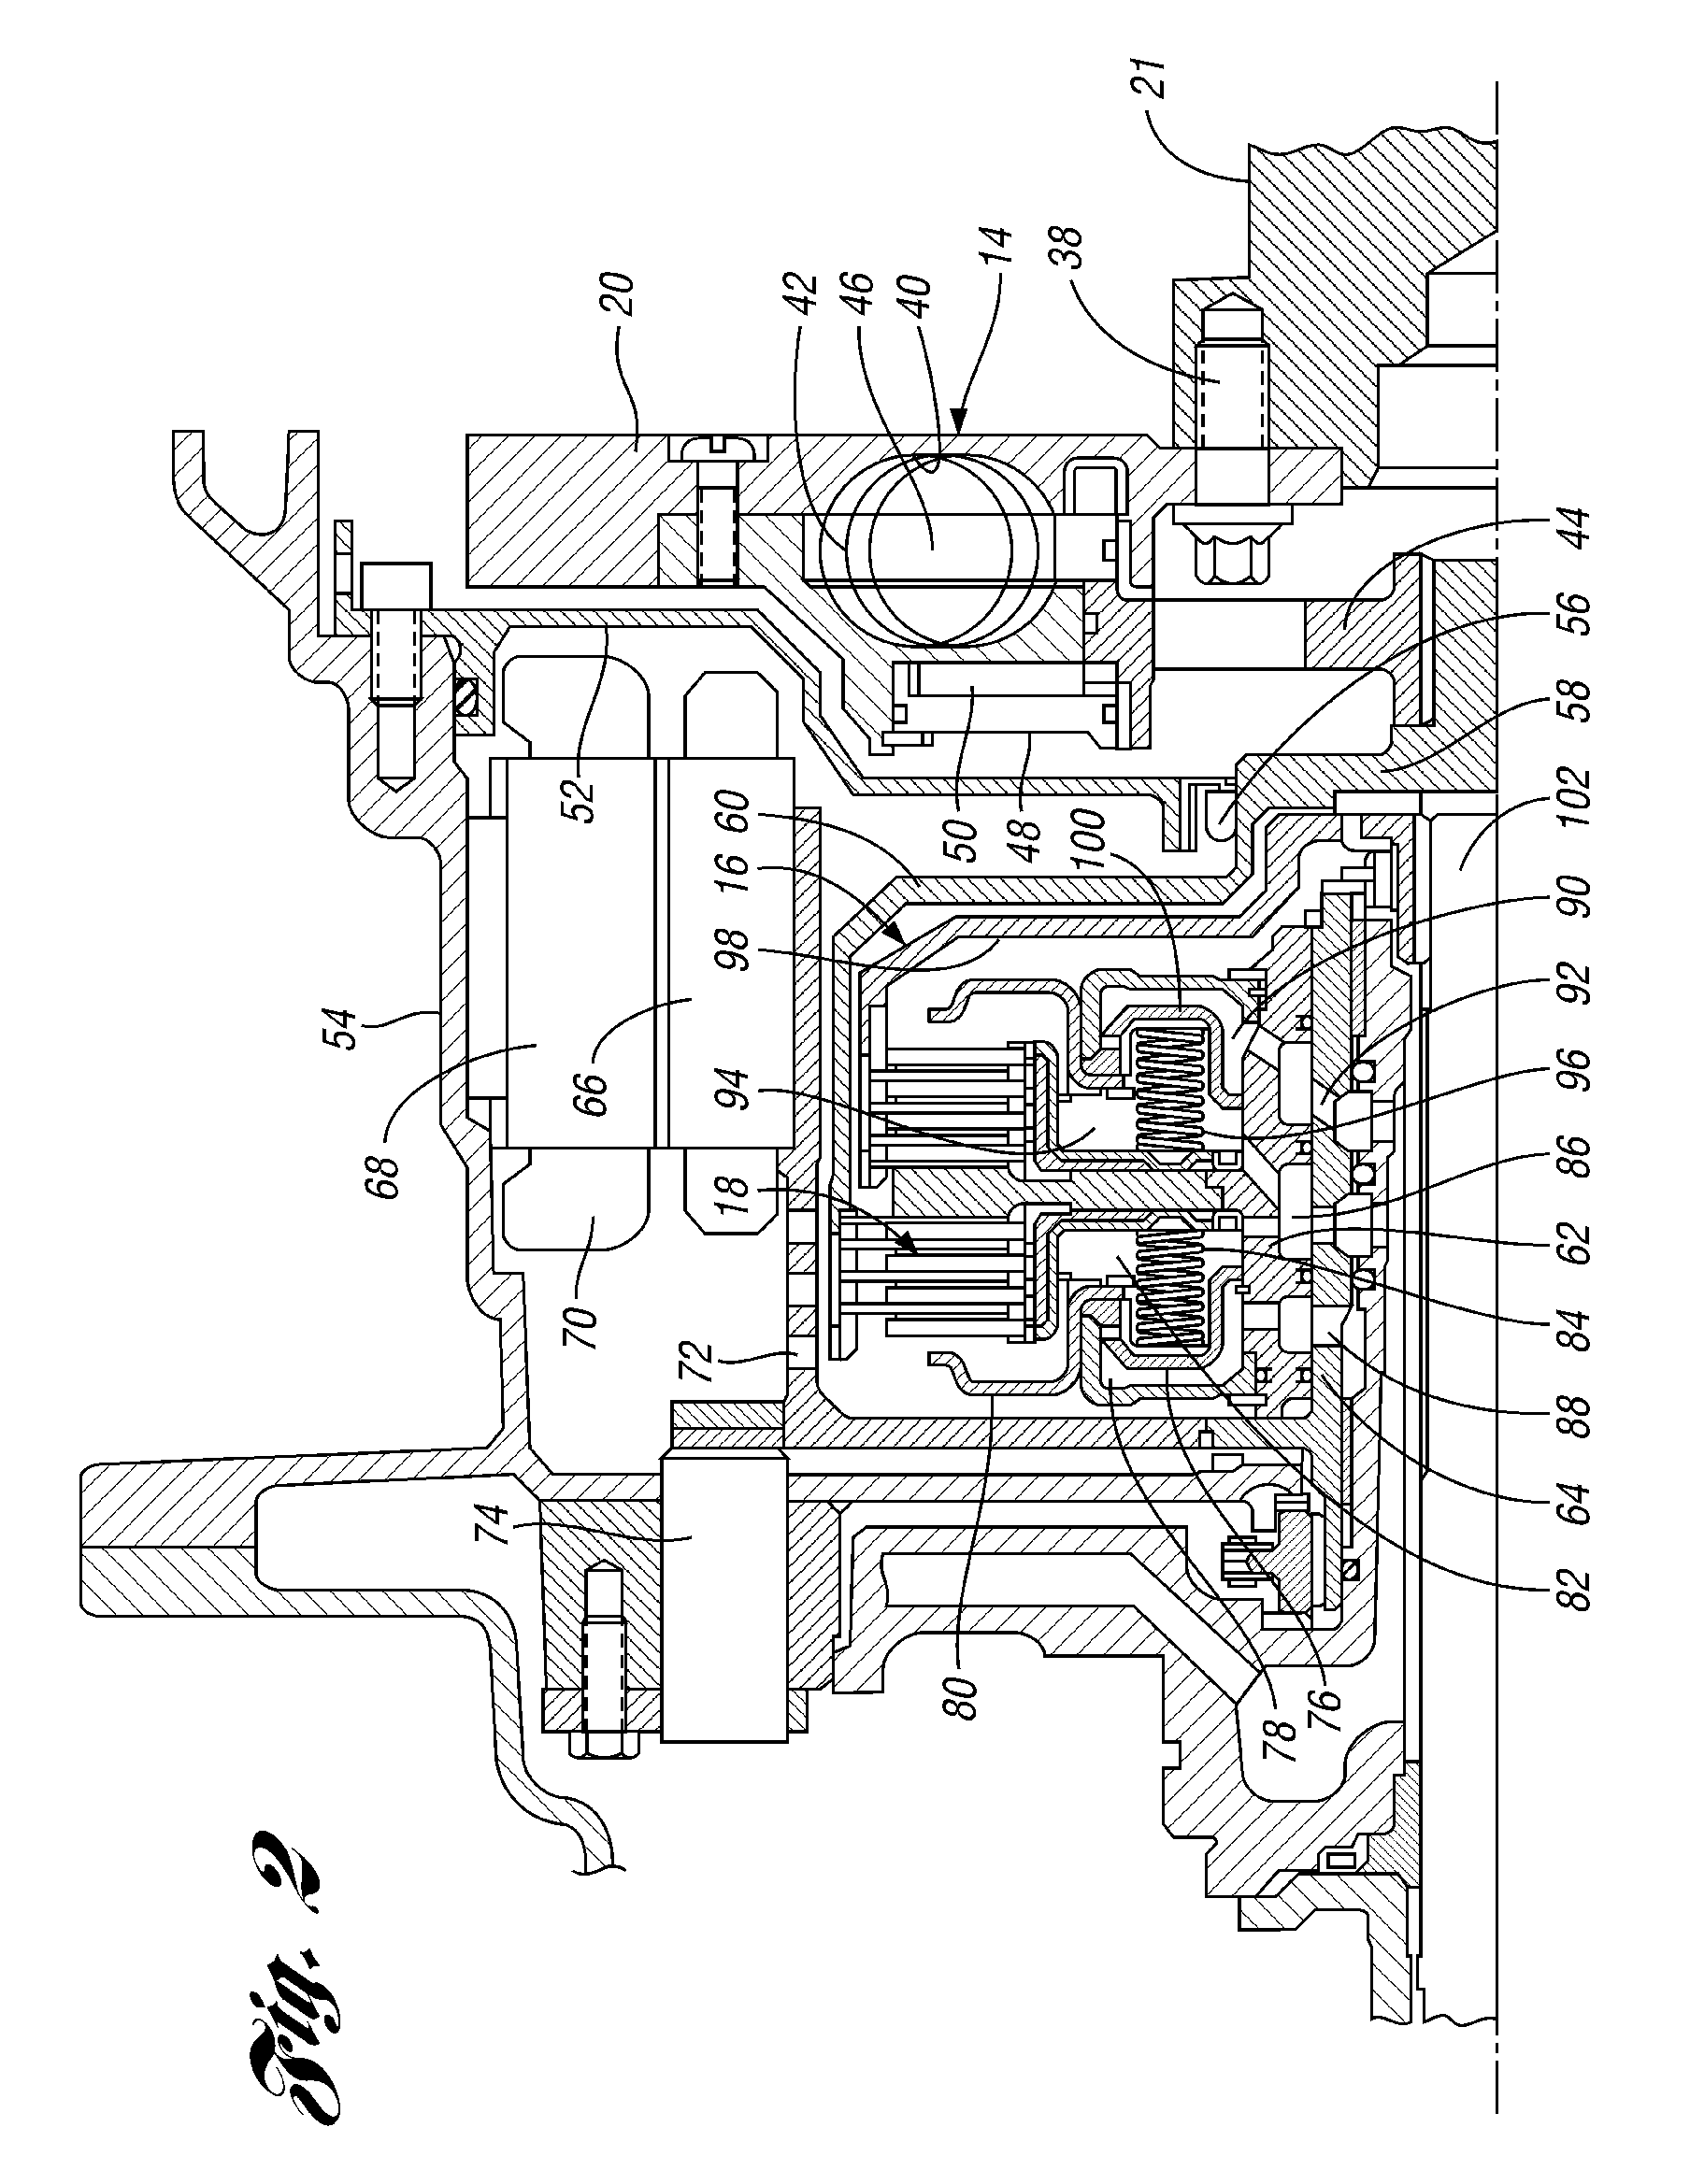 Control method for cooling a launch clutch and an electric motor in a hybrid electric vehicle powertrain